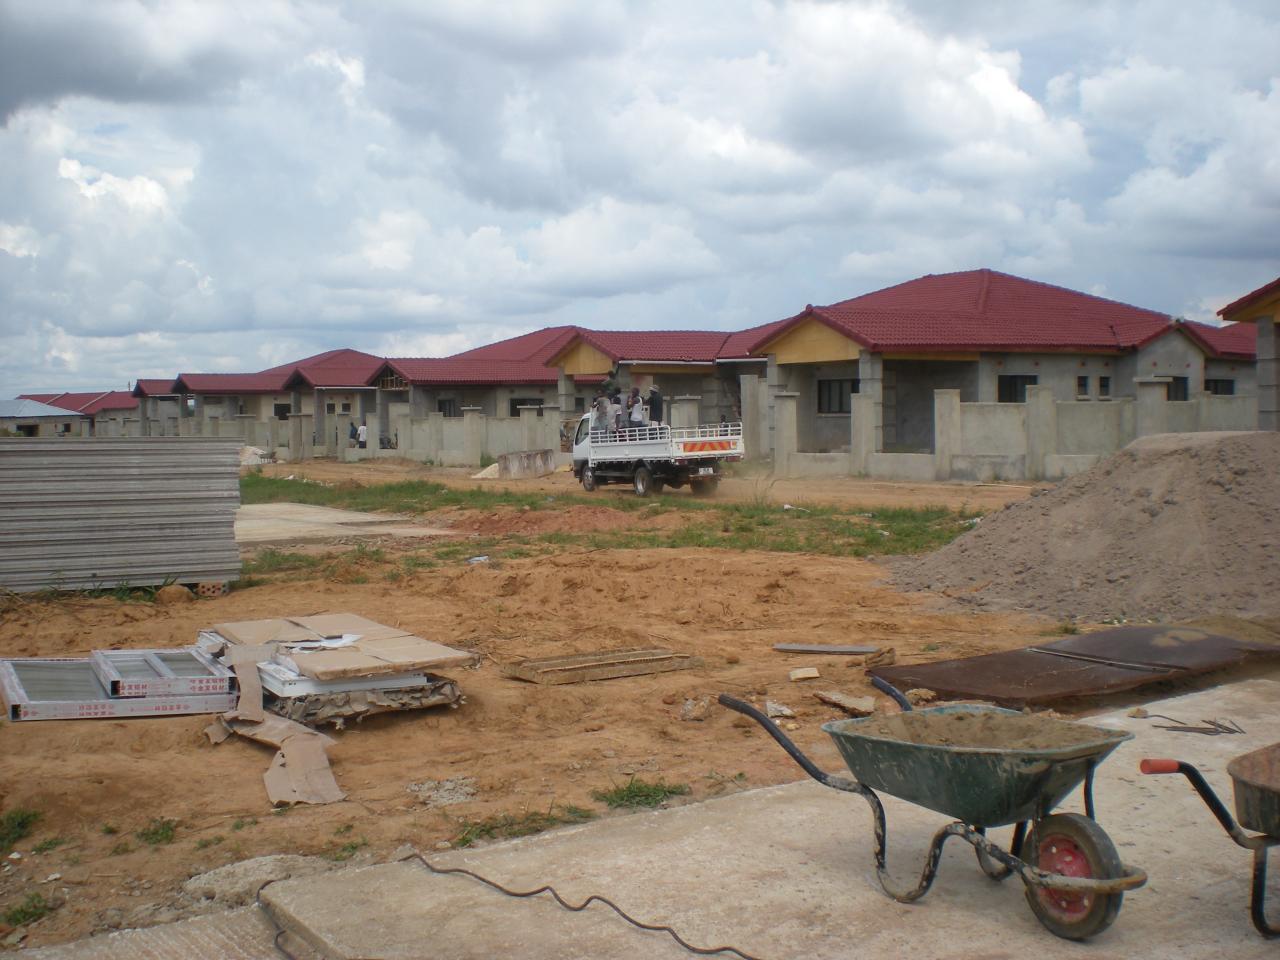 http://phomihome.com/en/fields-of-activity/residential-renovation-project-in-zambia-31